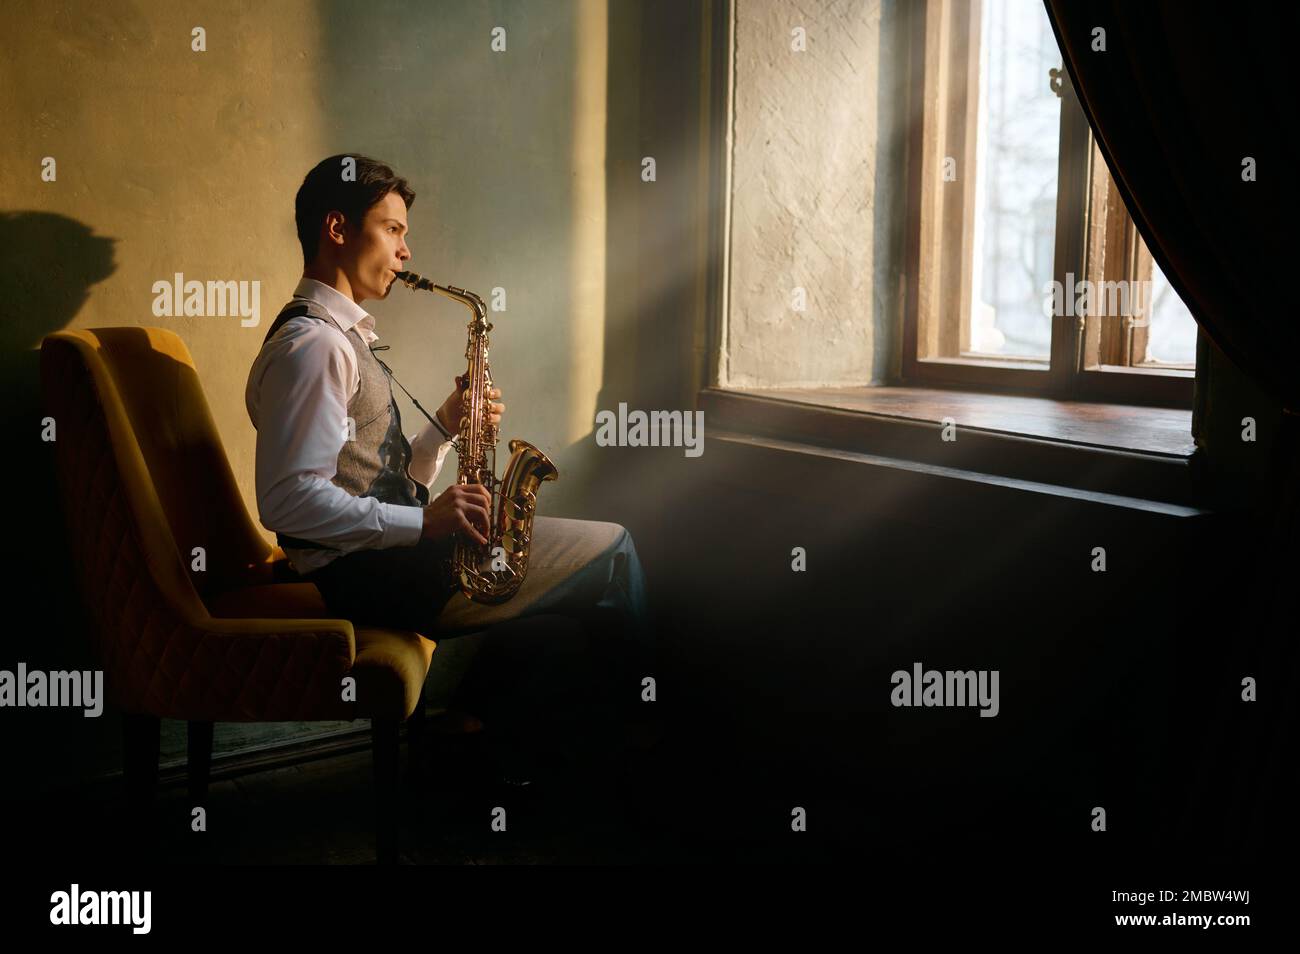 Jazz musician playing saxophone at the window Stock Photo